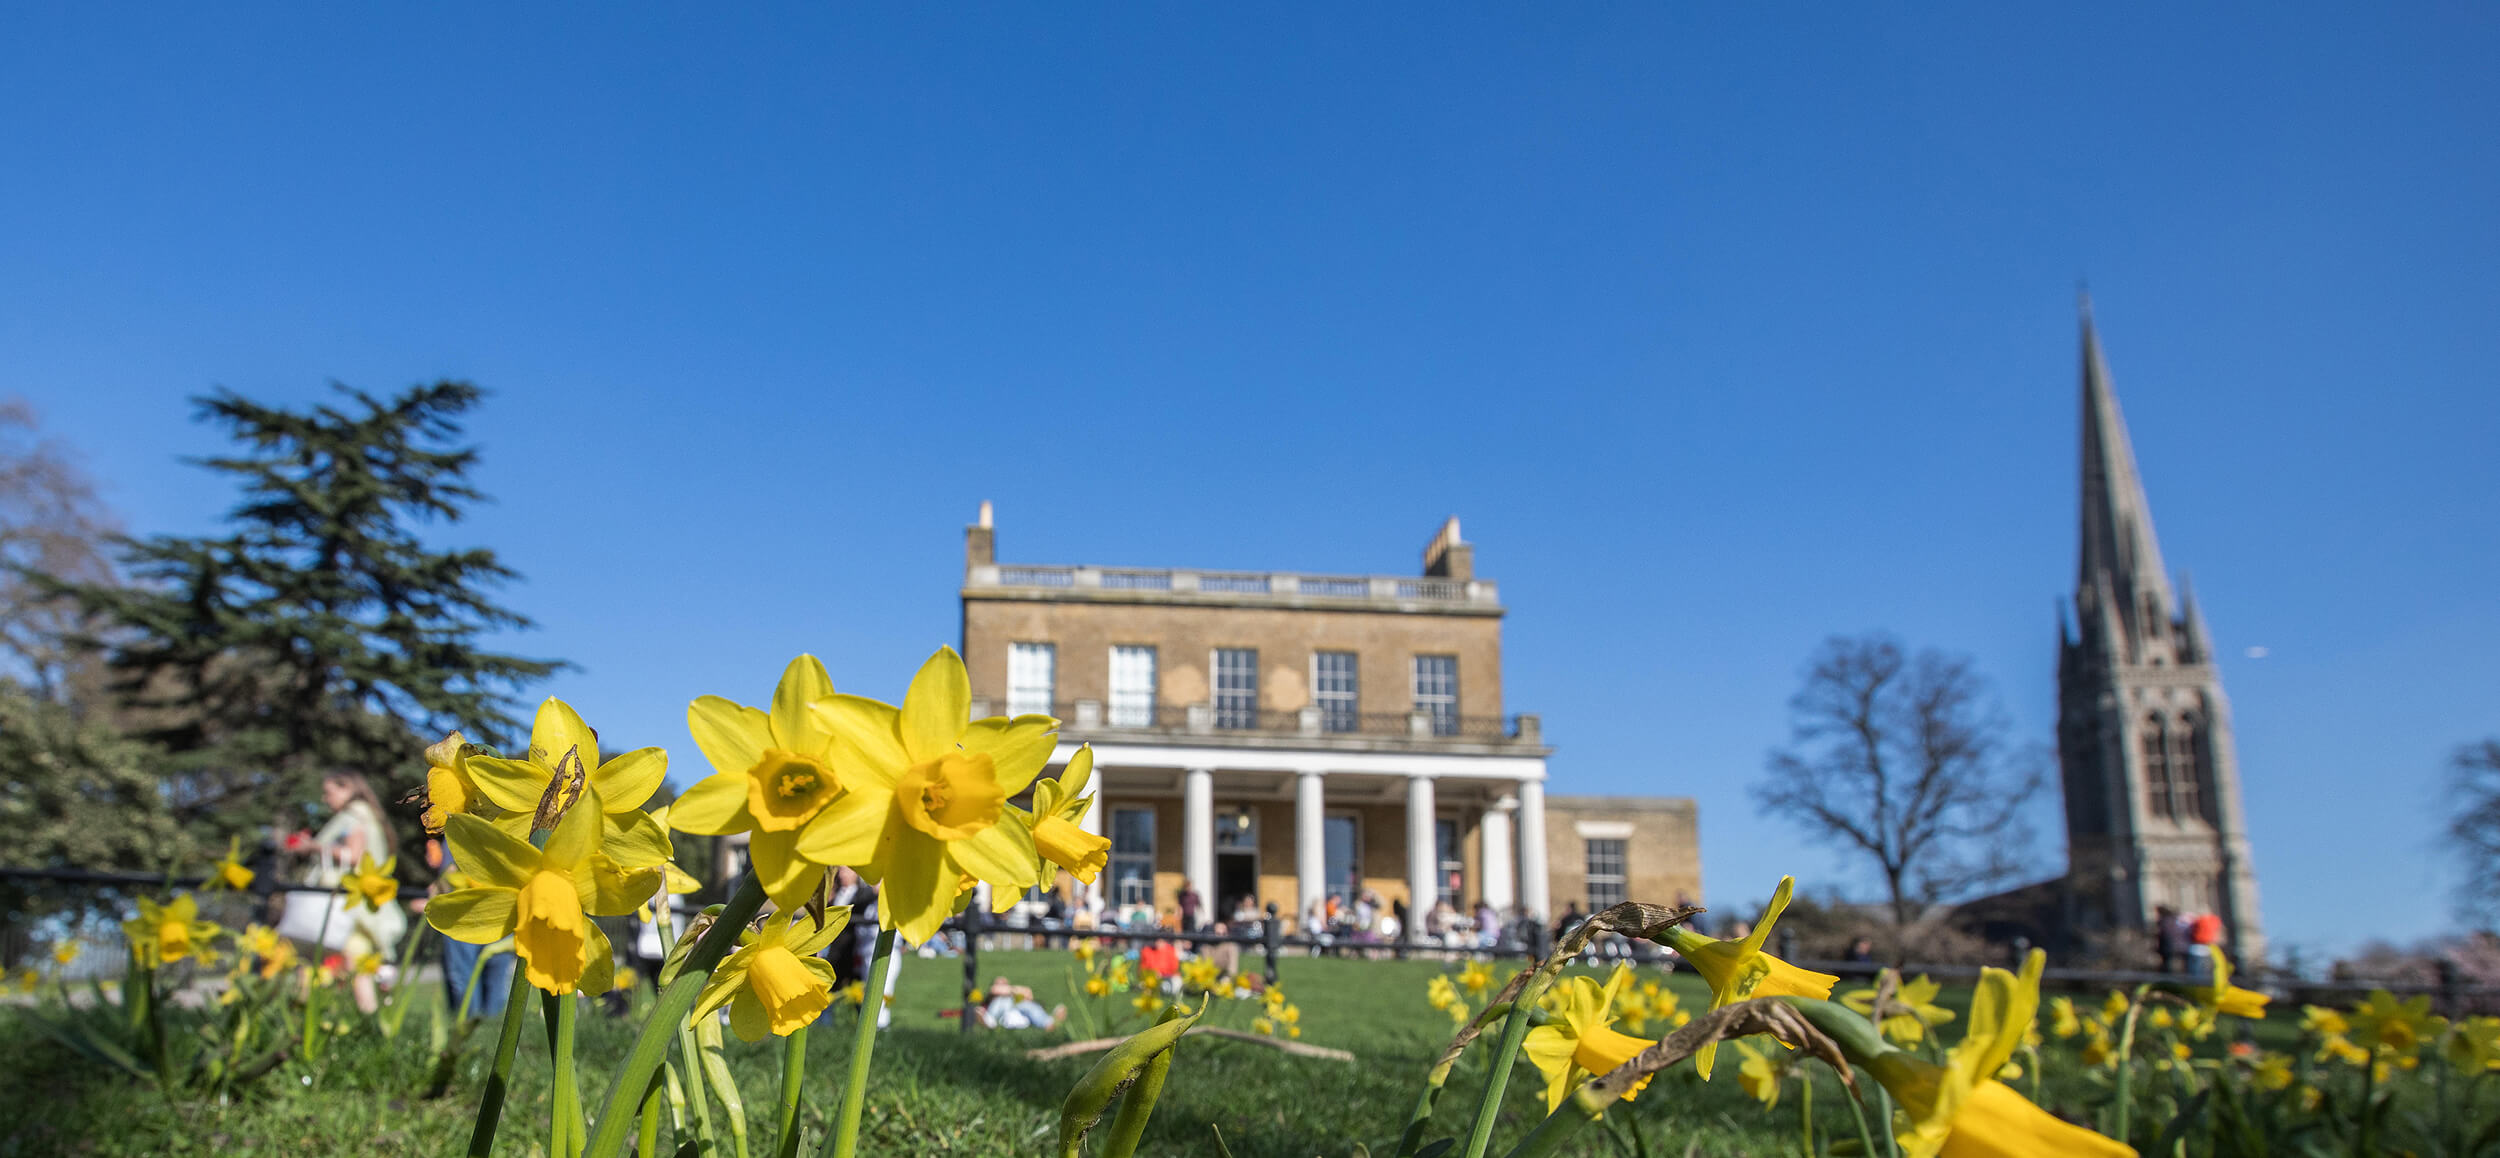 Photo of local landmark - Clissold House - with blue sky and daffodils